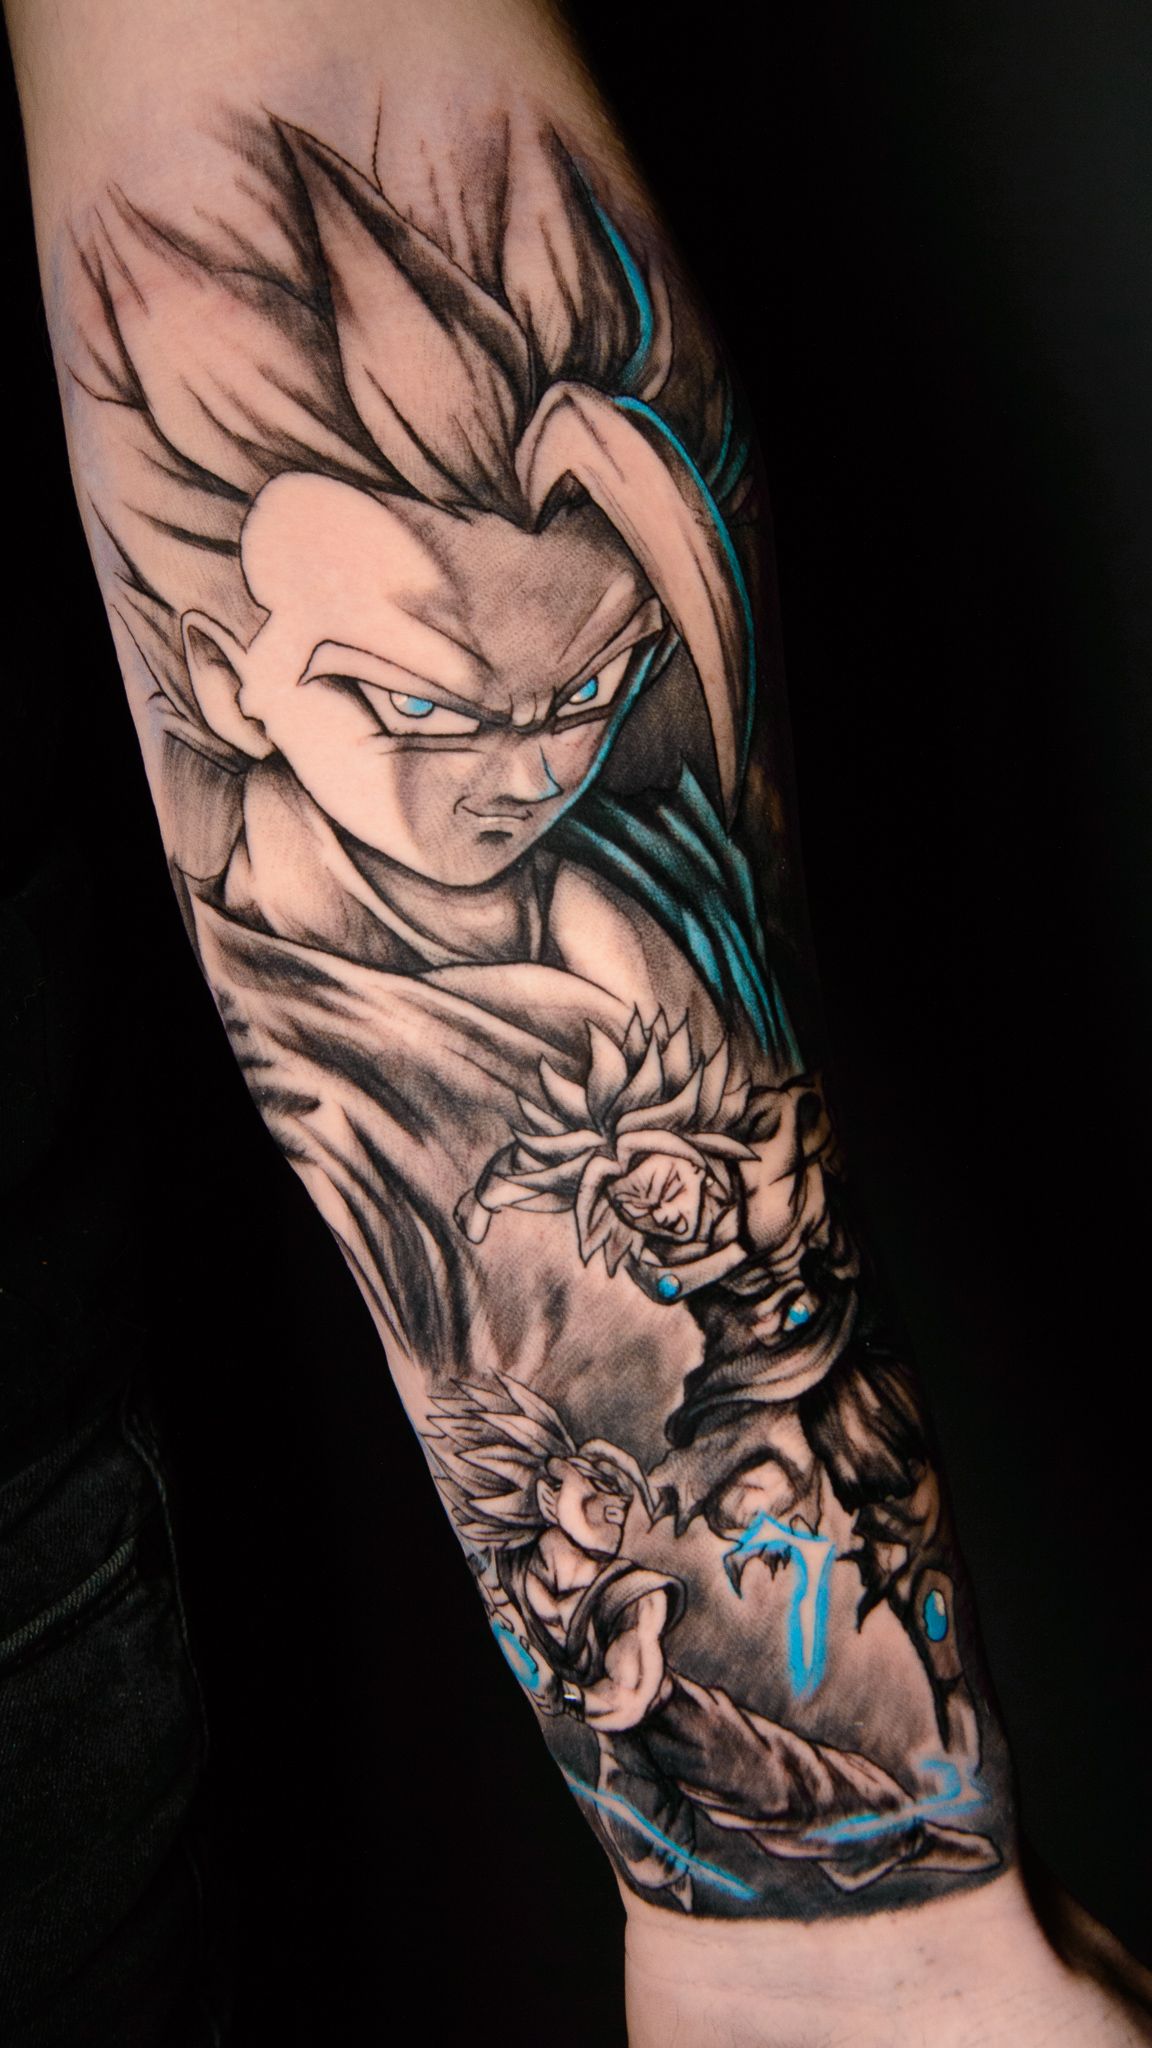 Dragon Ball Multiverse on Twitter WHAOU  We can say that Bardock  catalan translator is into DBM  For sure DBM is into Bardock litterally   Beautiful tatoo  Awesome work by